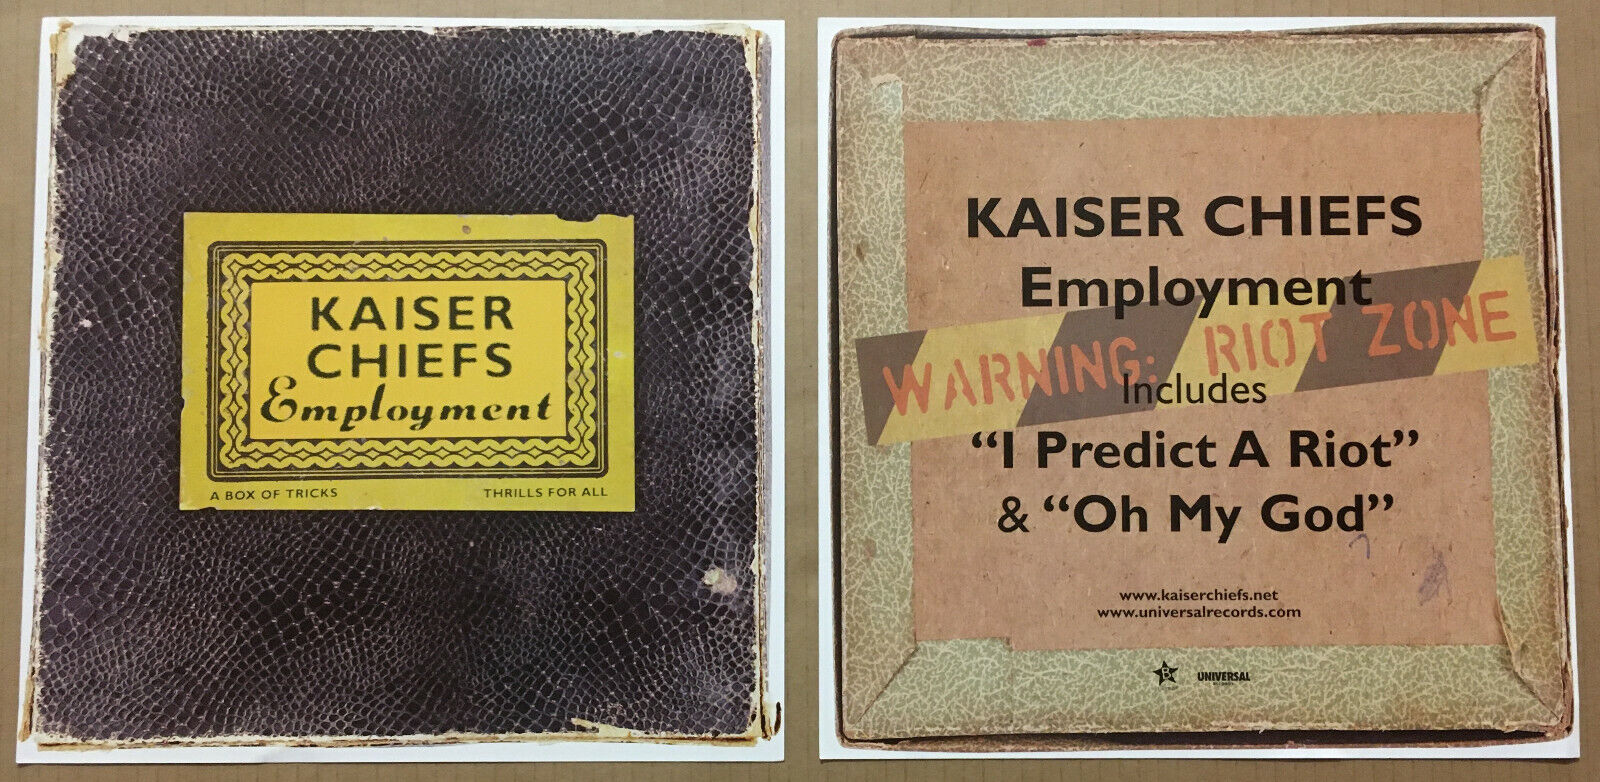 KAISER CHIEFS Rare 2005 Set 2 DOUBLE SIDED PROMO POSTER FLAT for Employment CD